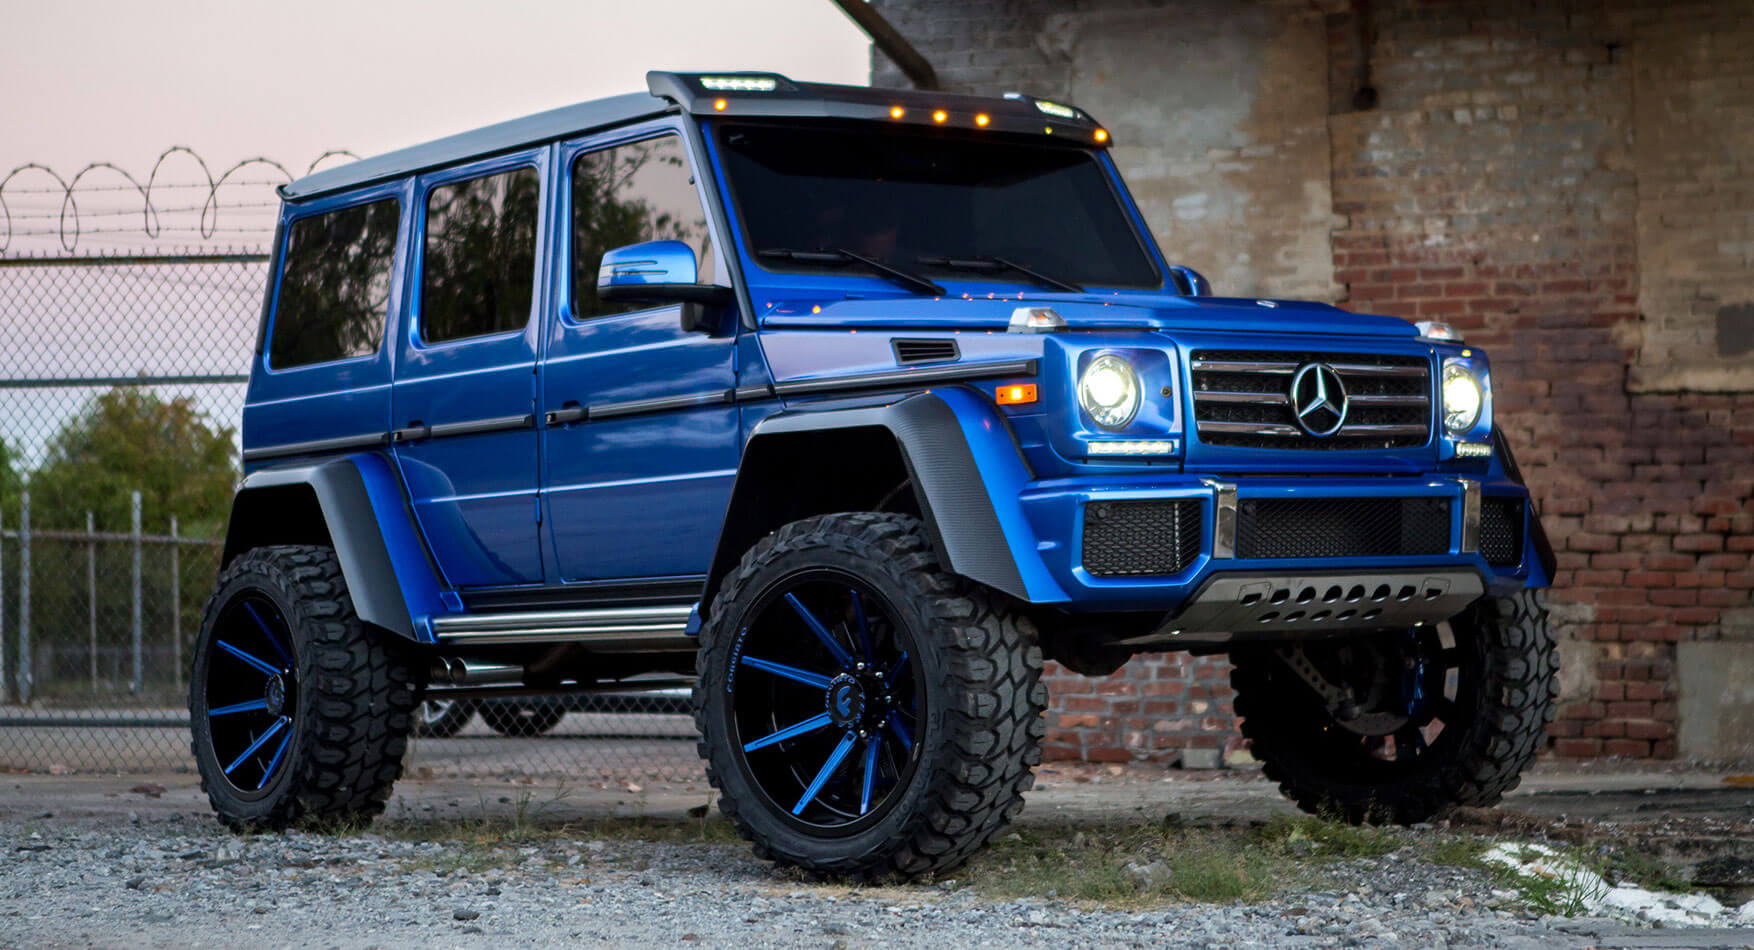 Mercedes Benz G550 4 4 With 24 Inch Wheels Is A Hit On Instagram Carscoops